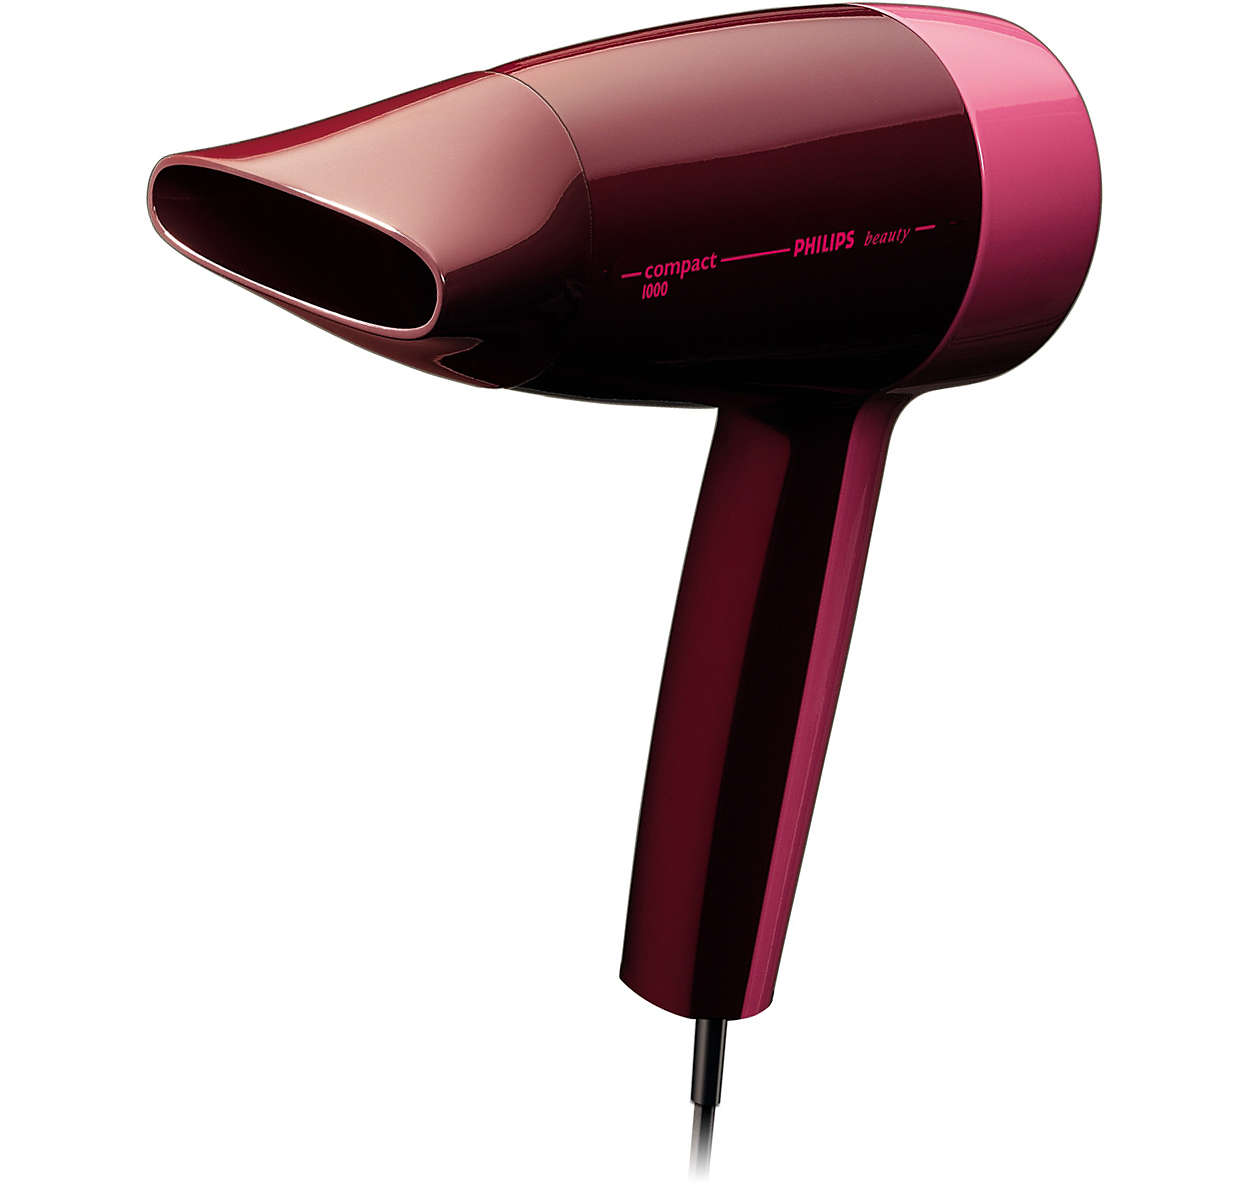 1000W hairdryer with two heat/speed settings